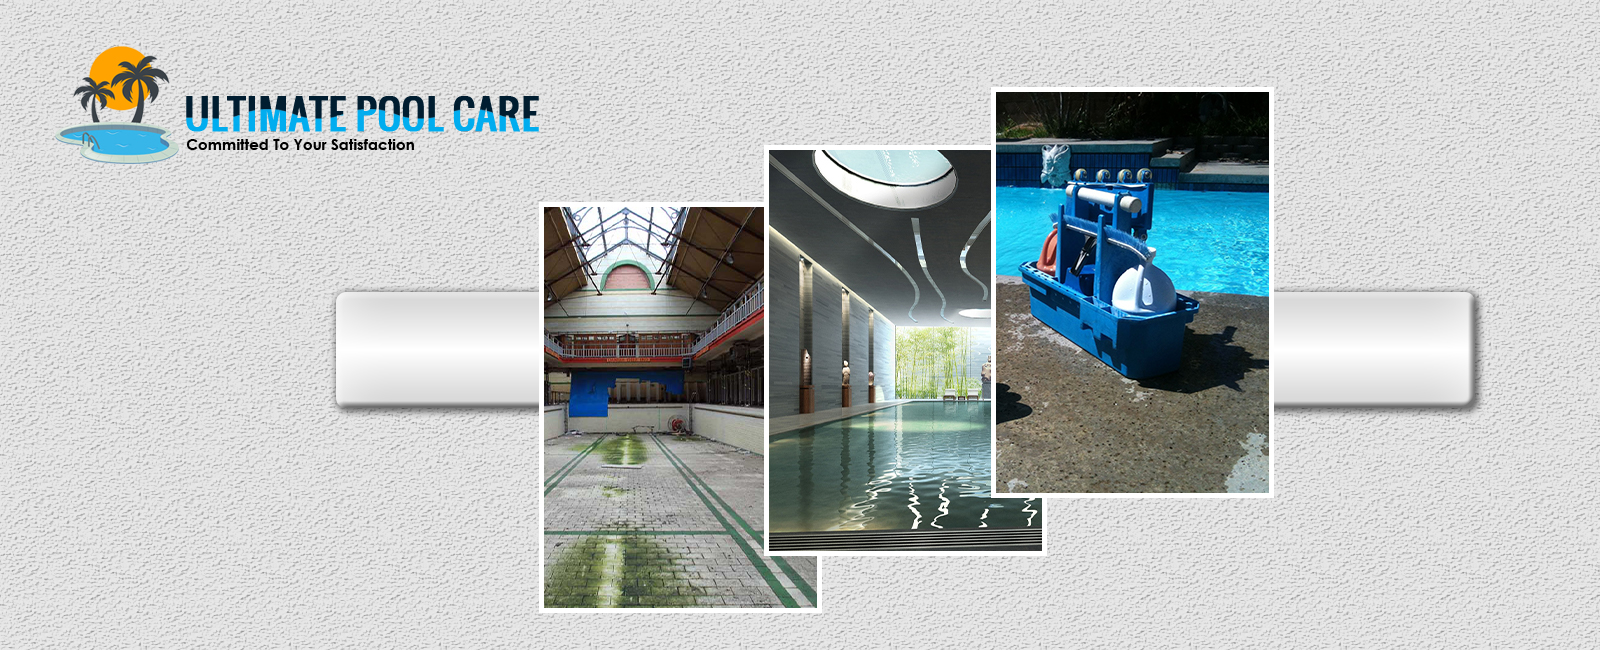 weekly-indoor-pool-in-need-of-cleaning-and-maintenance-well-maintained-indoor-pool-and-pool-maintenance-equipment